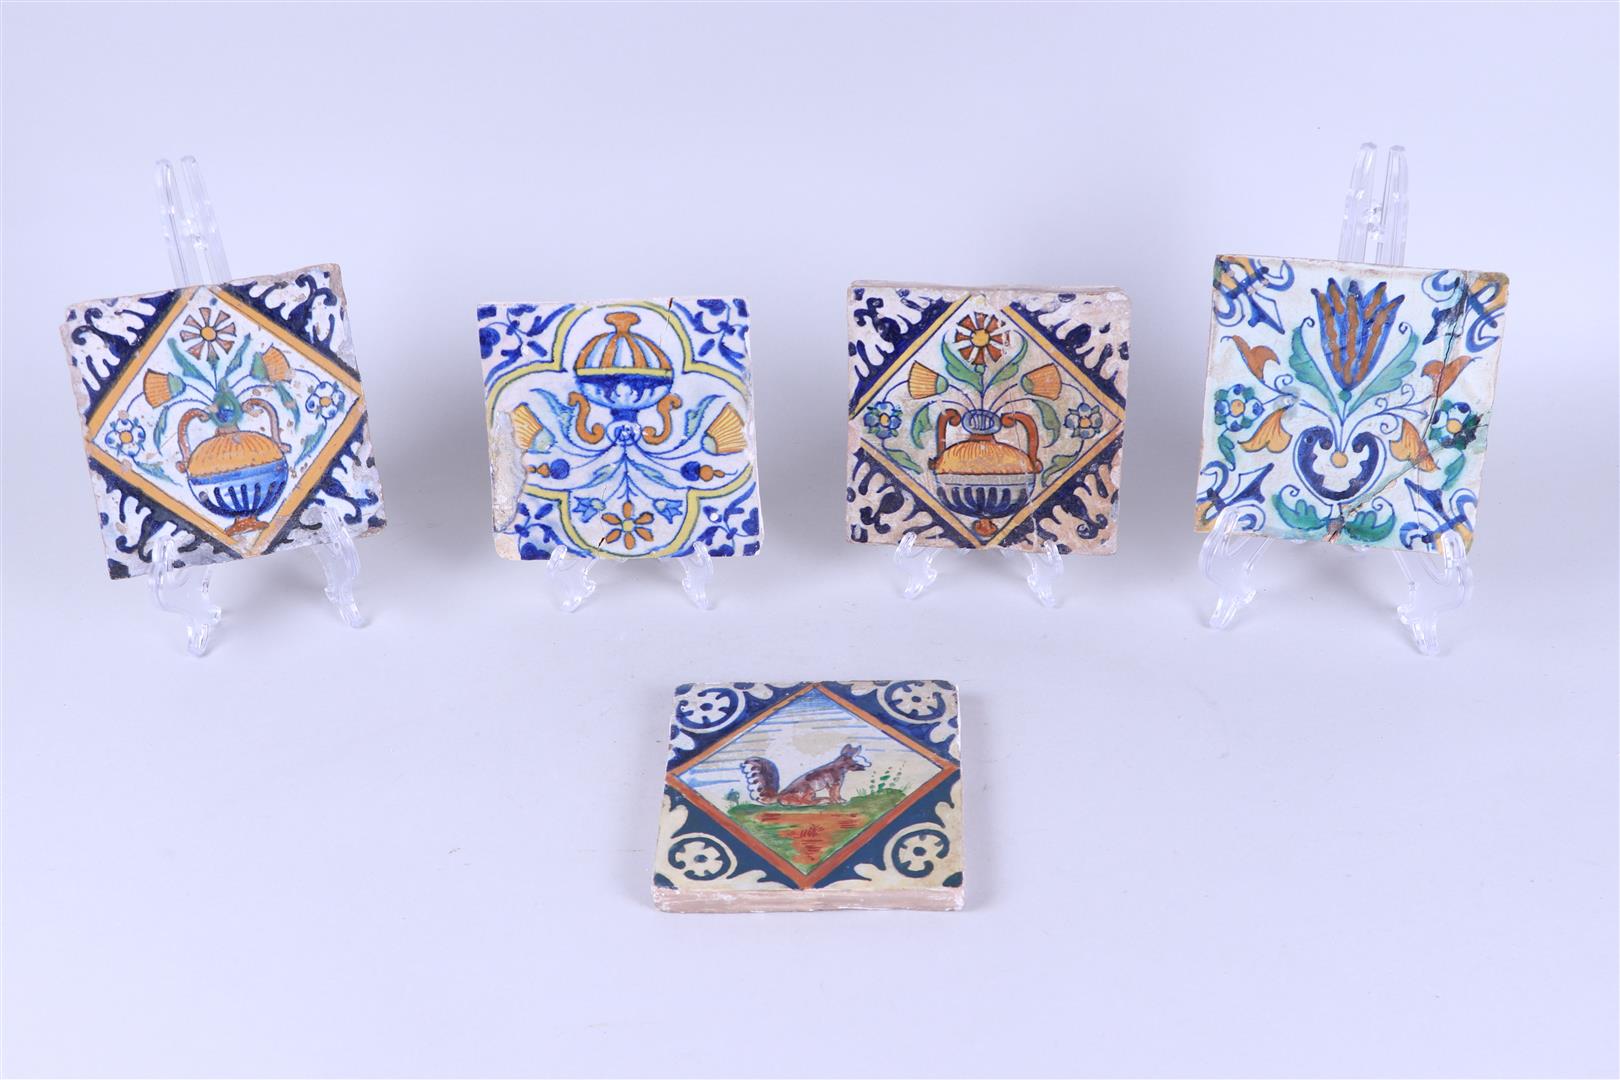 A lot of five polychrome tiles including three square tiles